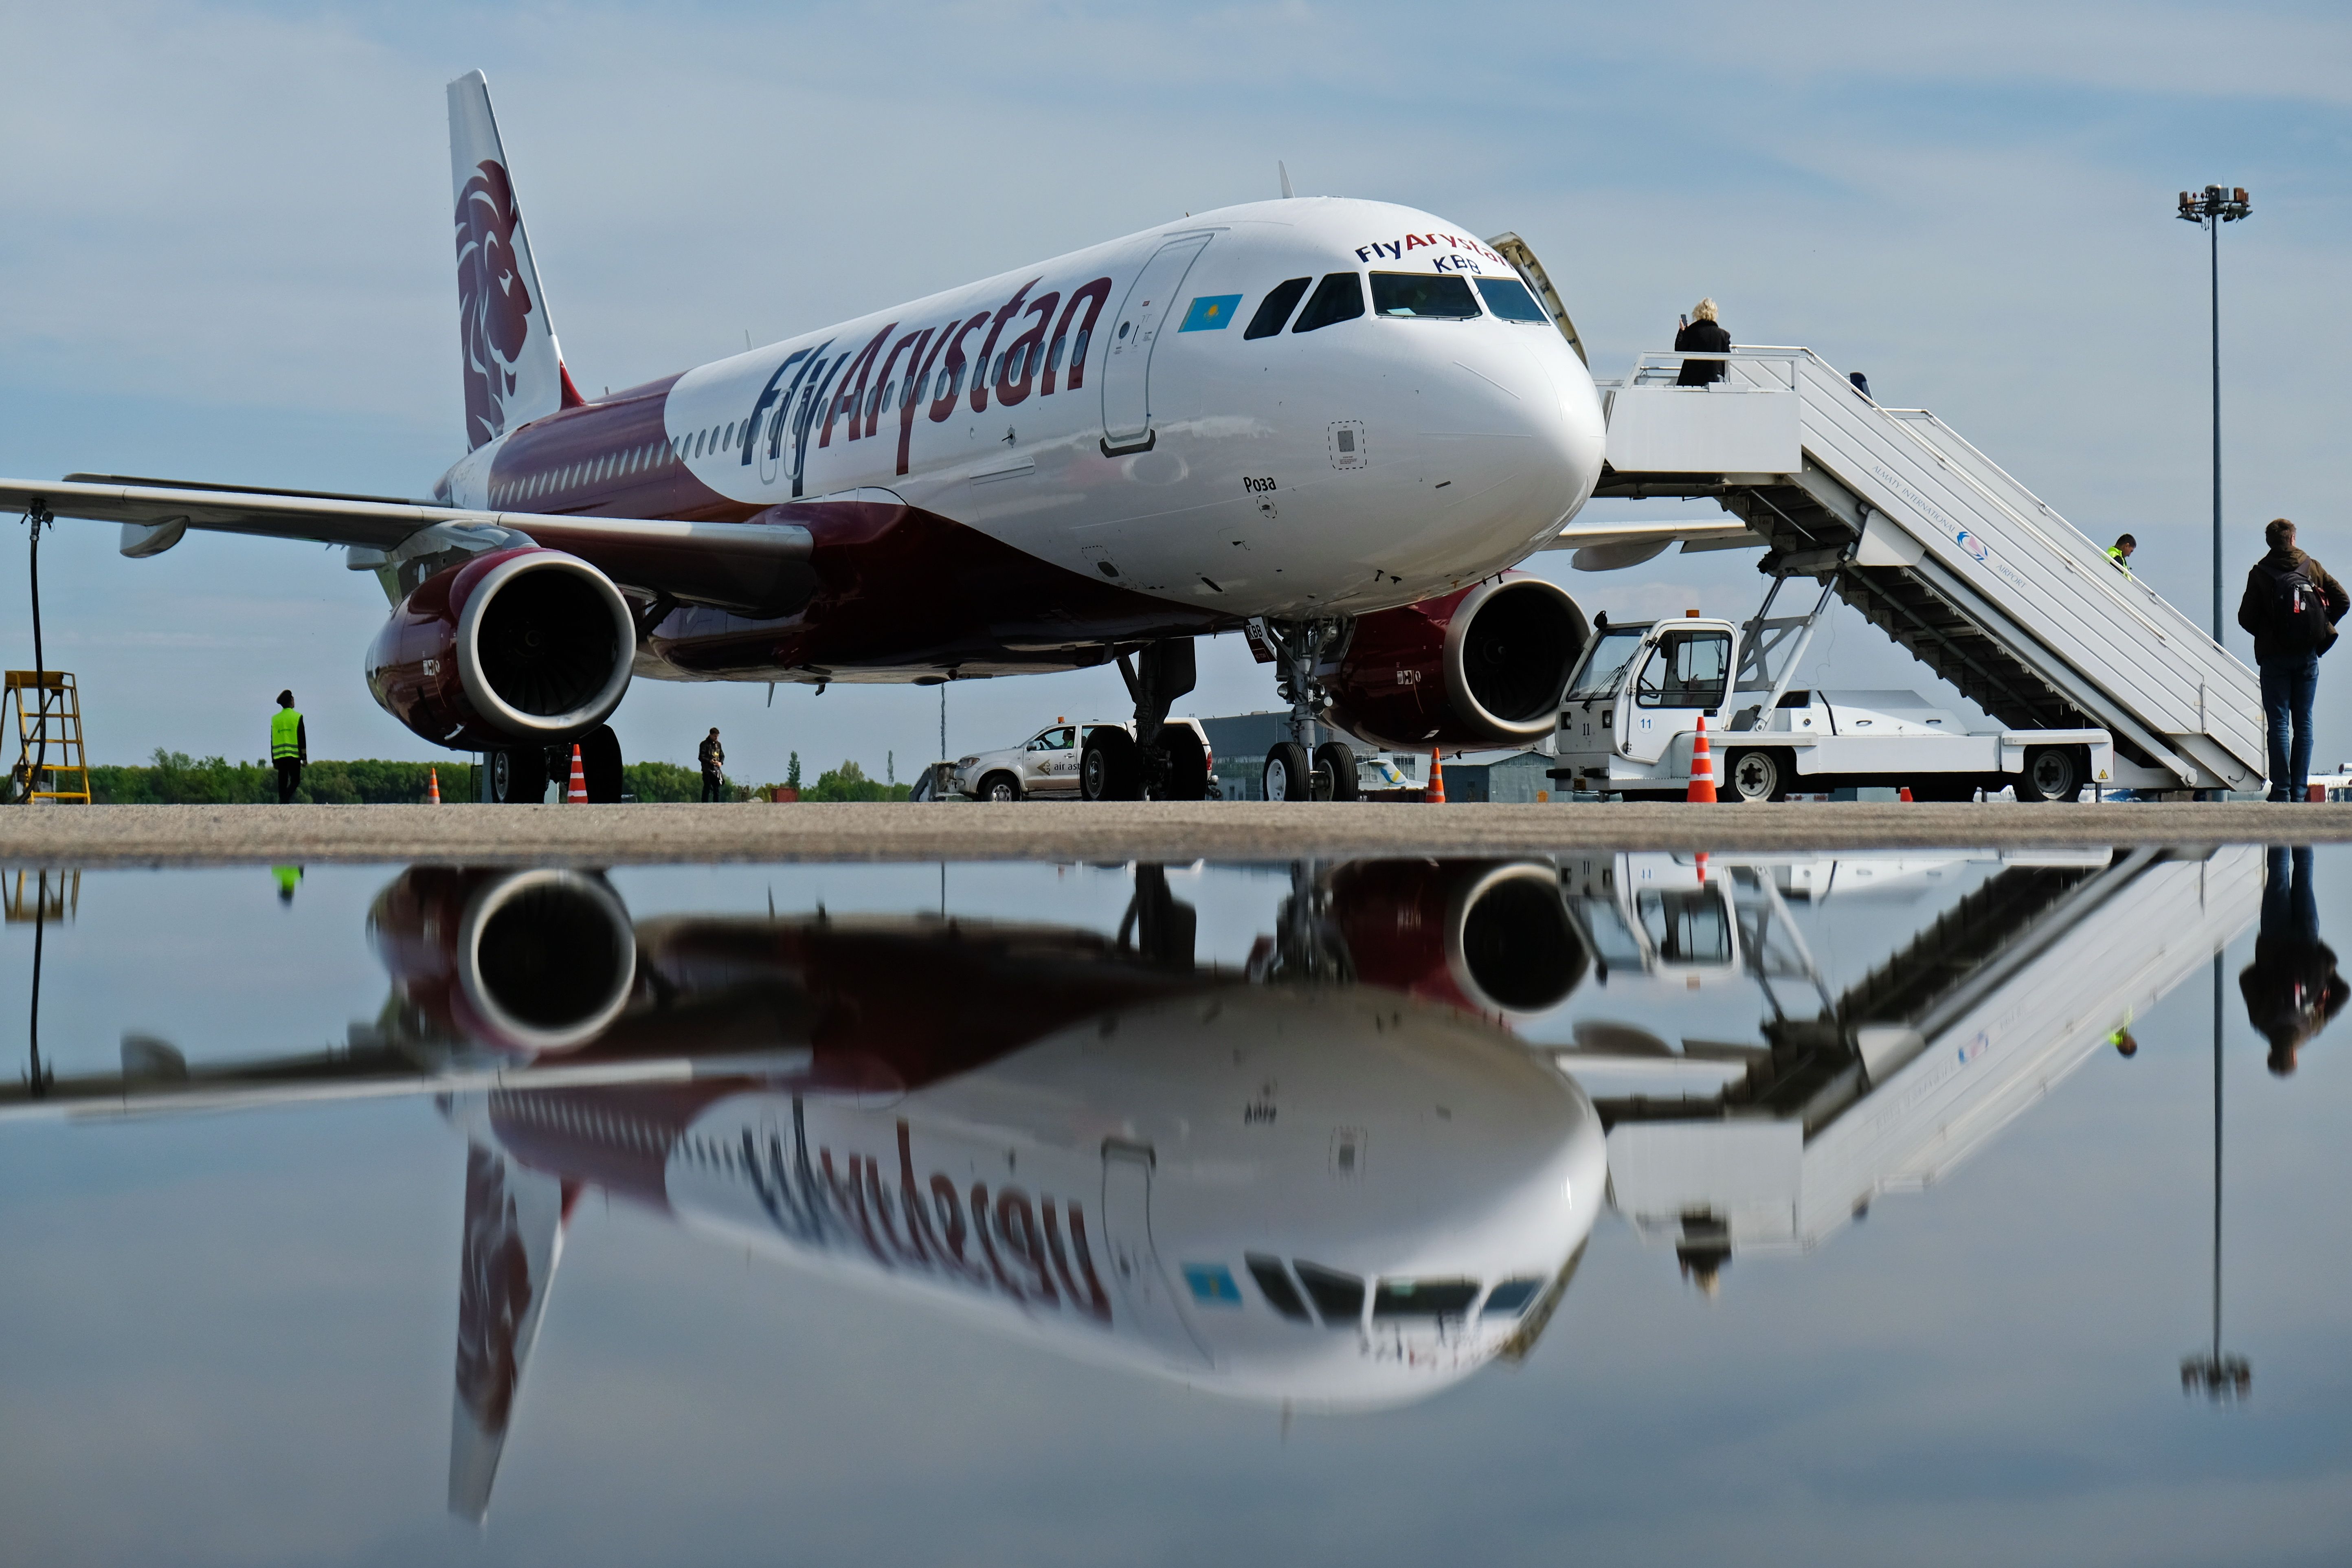 Reflection of the aircraft in the water